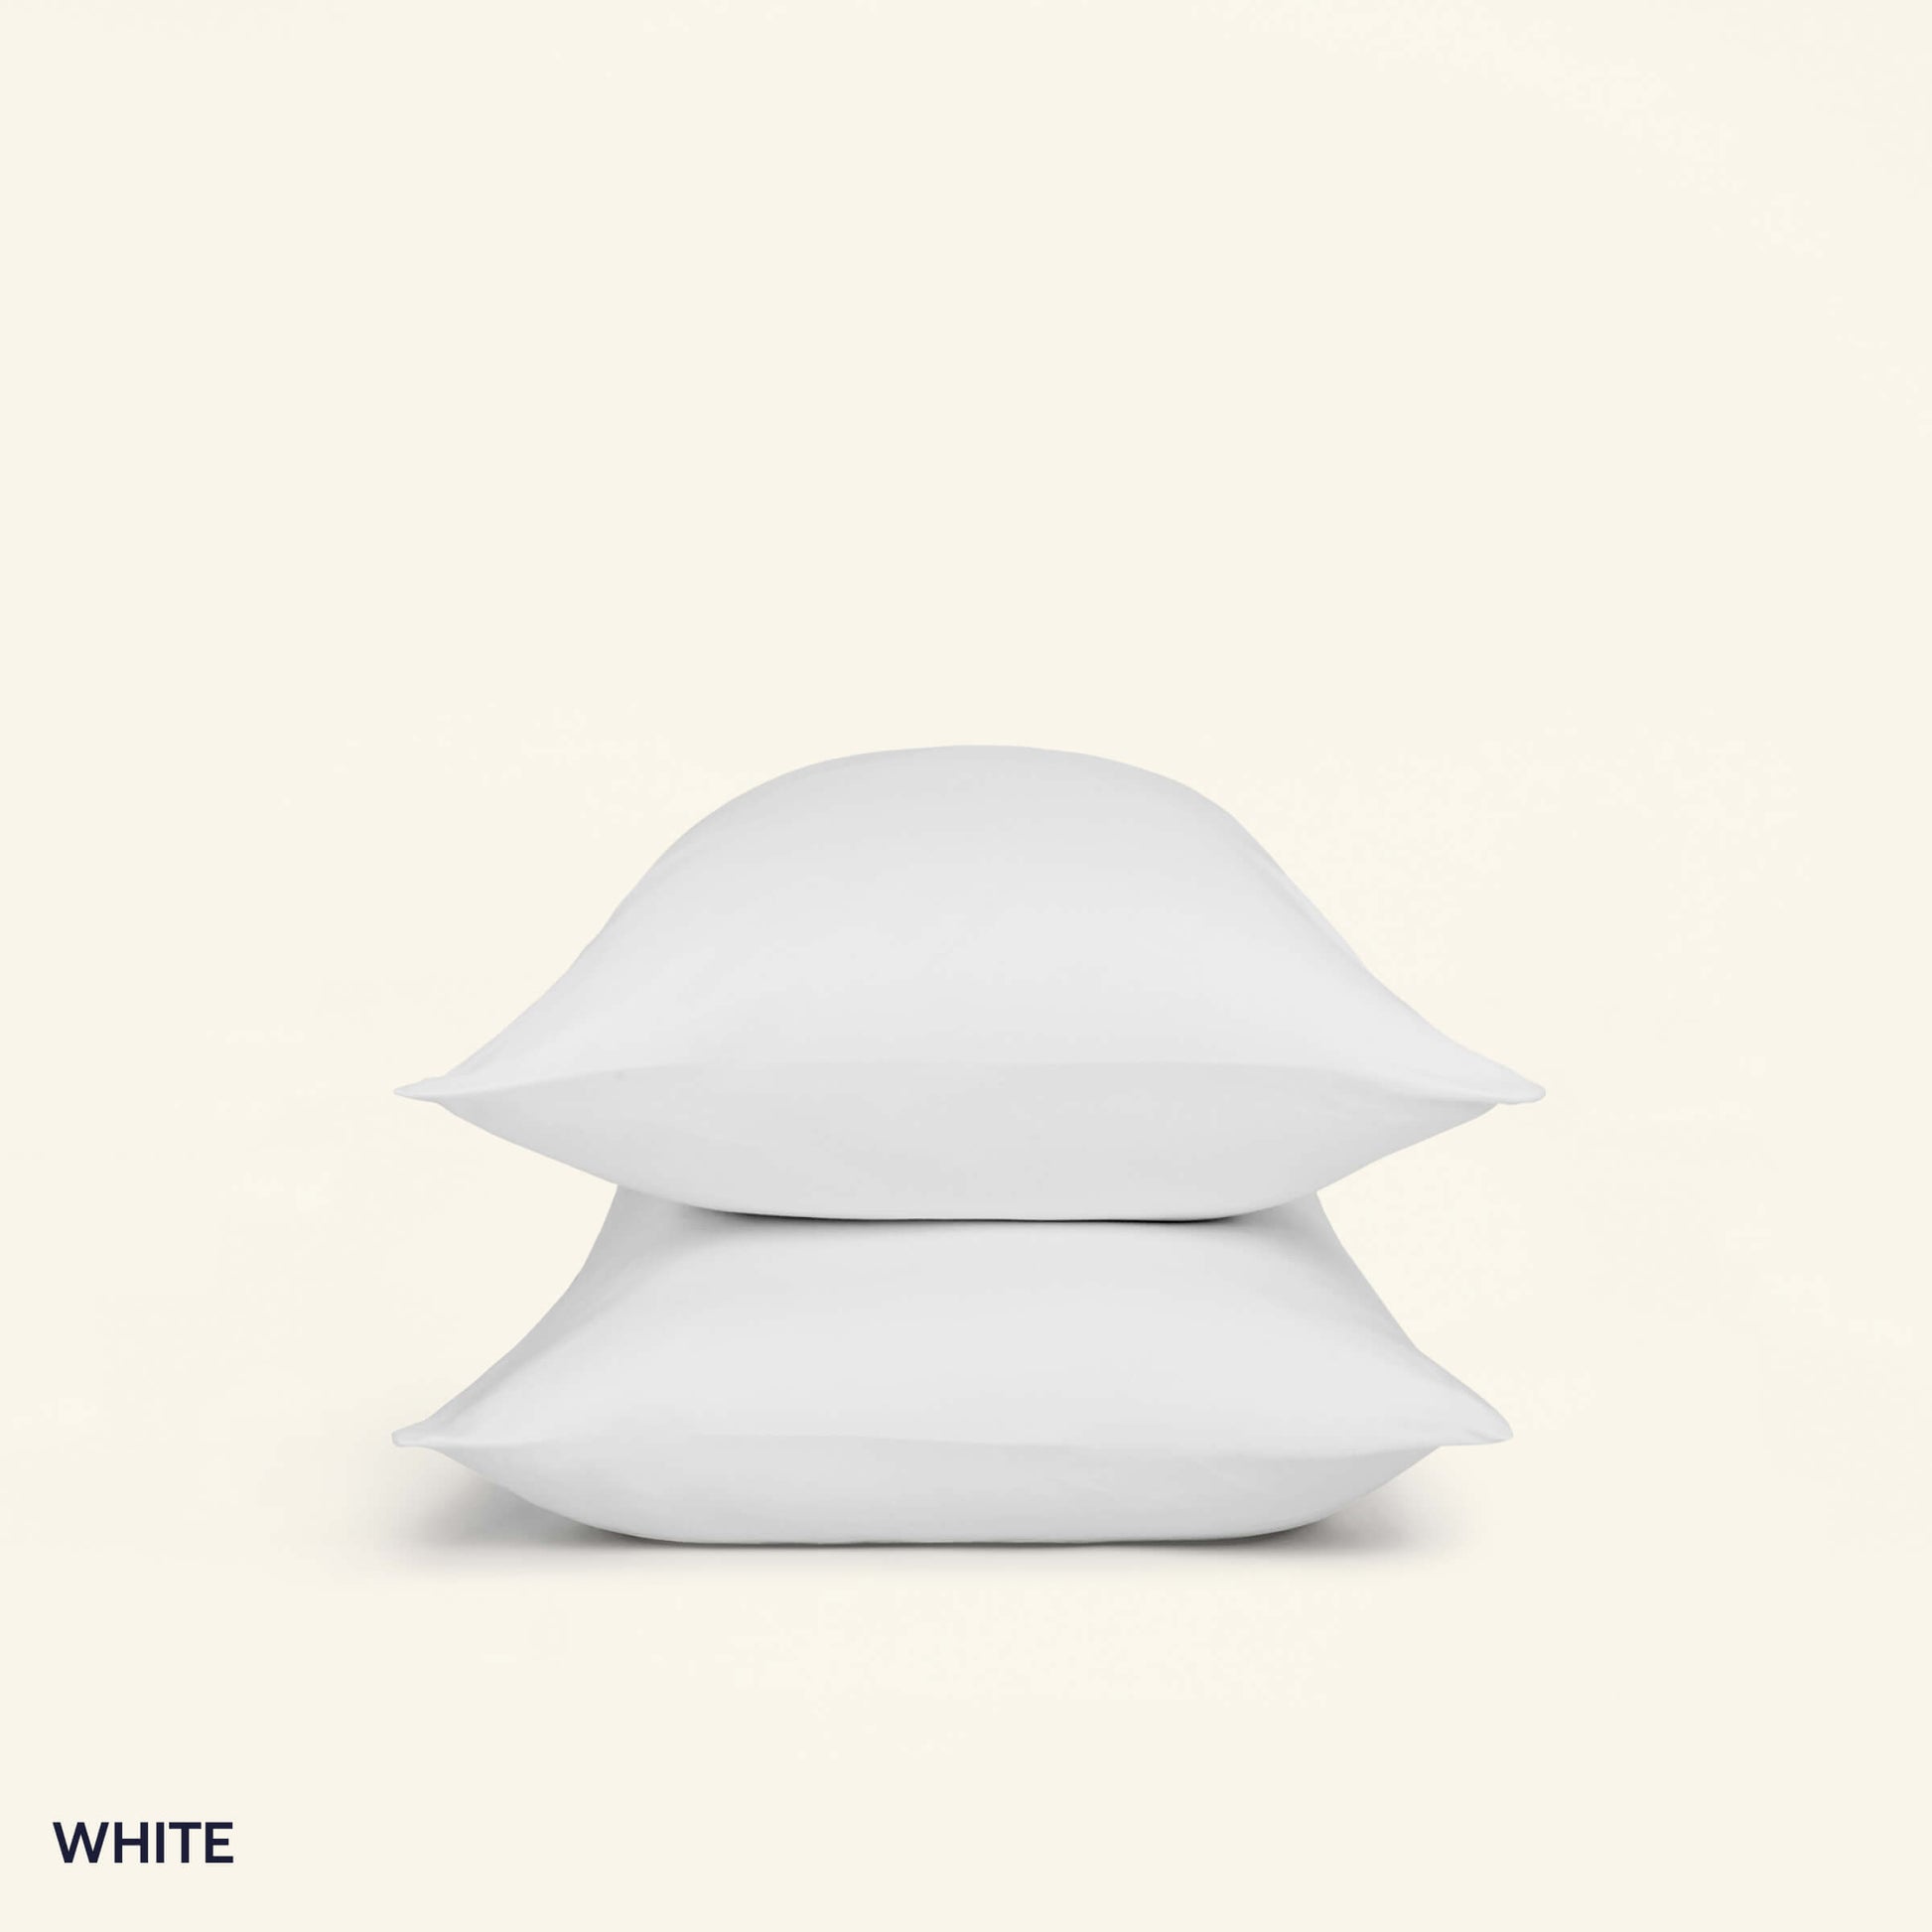 The Slumber Cloud Essential Pillowcase set made with Outlast temperature regulation technology in white